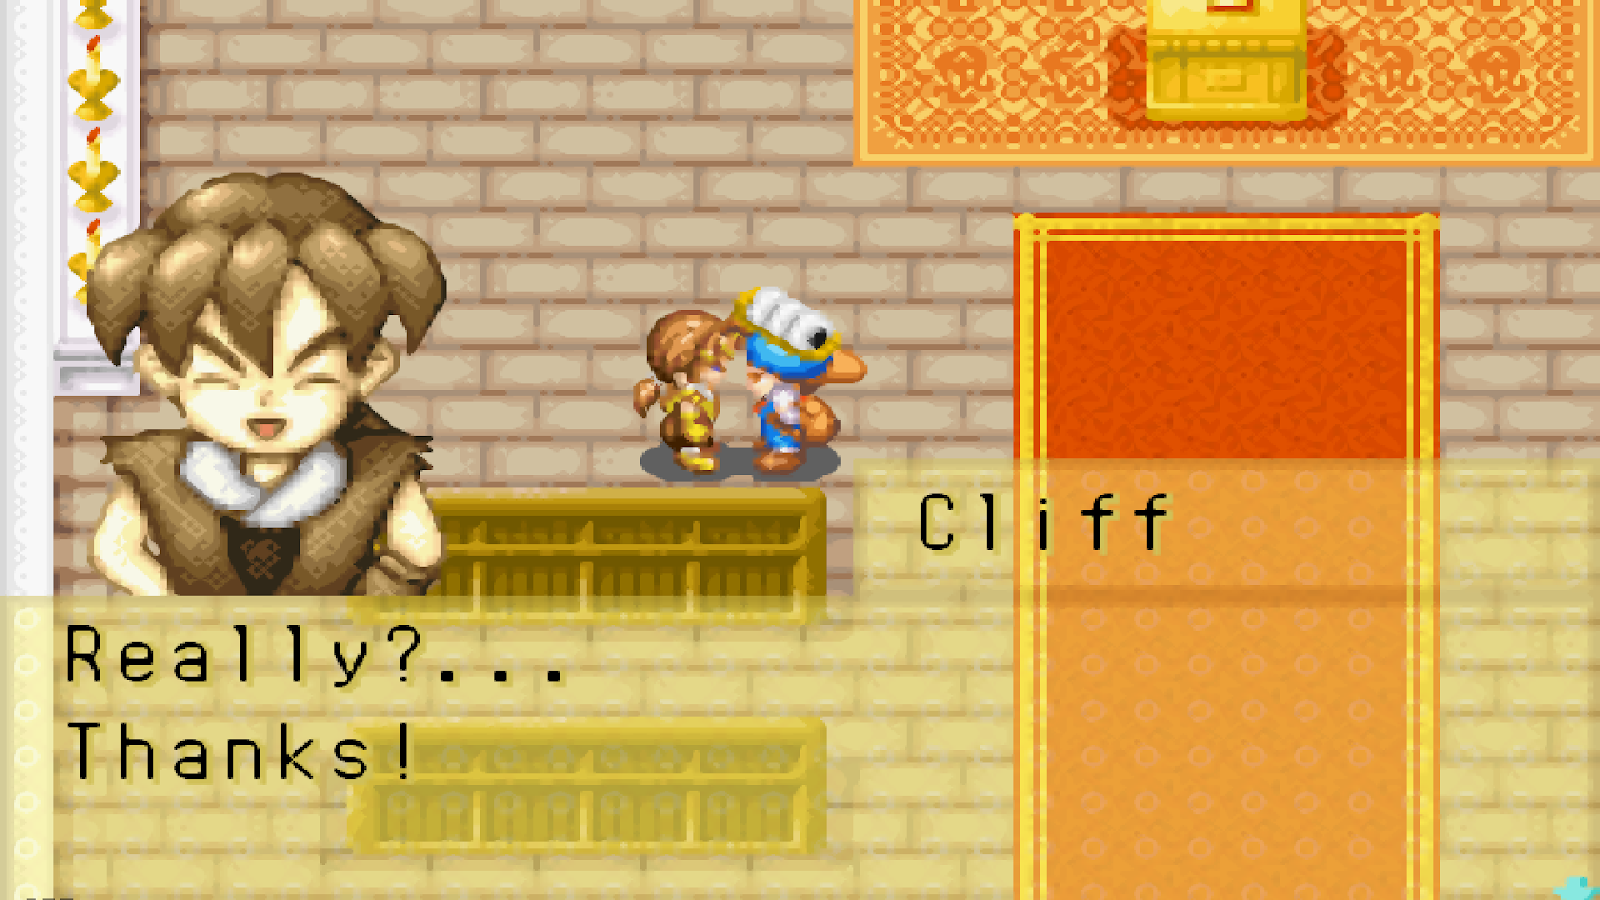 Cliff receives a rice ball as a gift | HM:FoMT